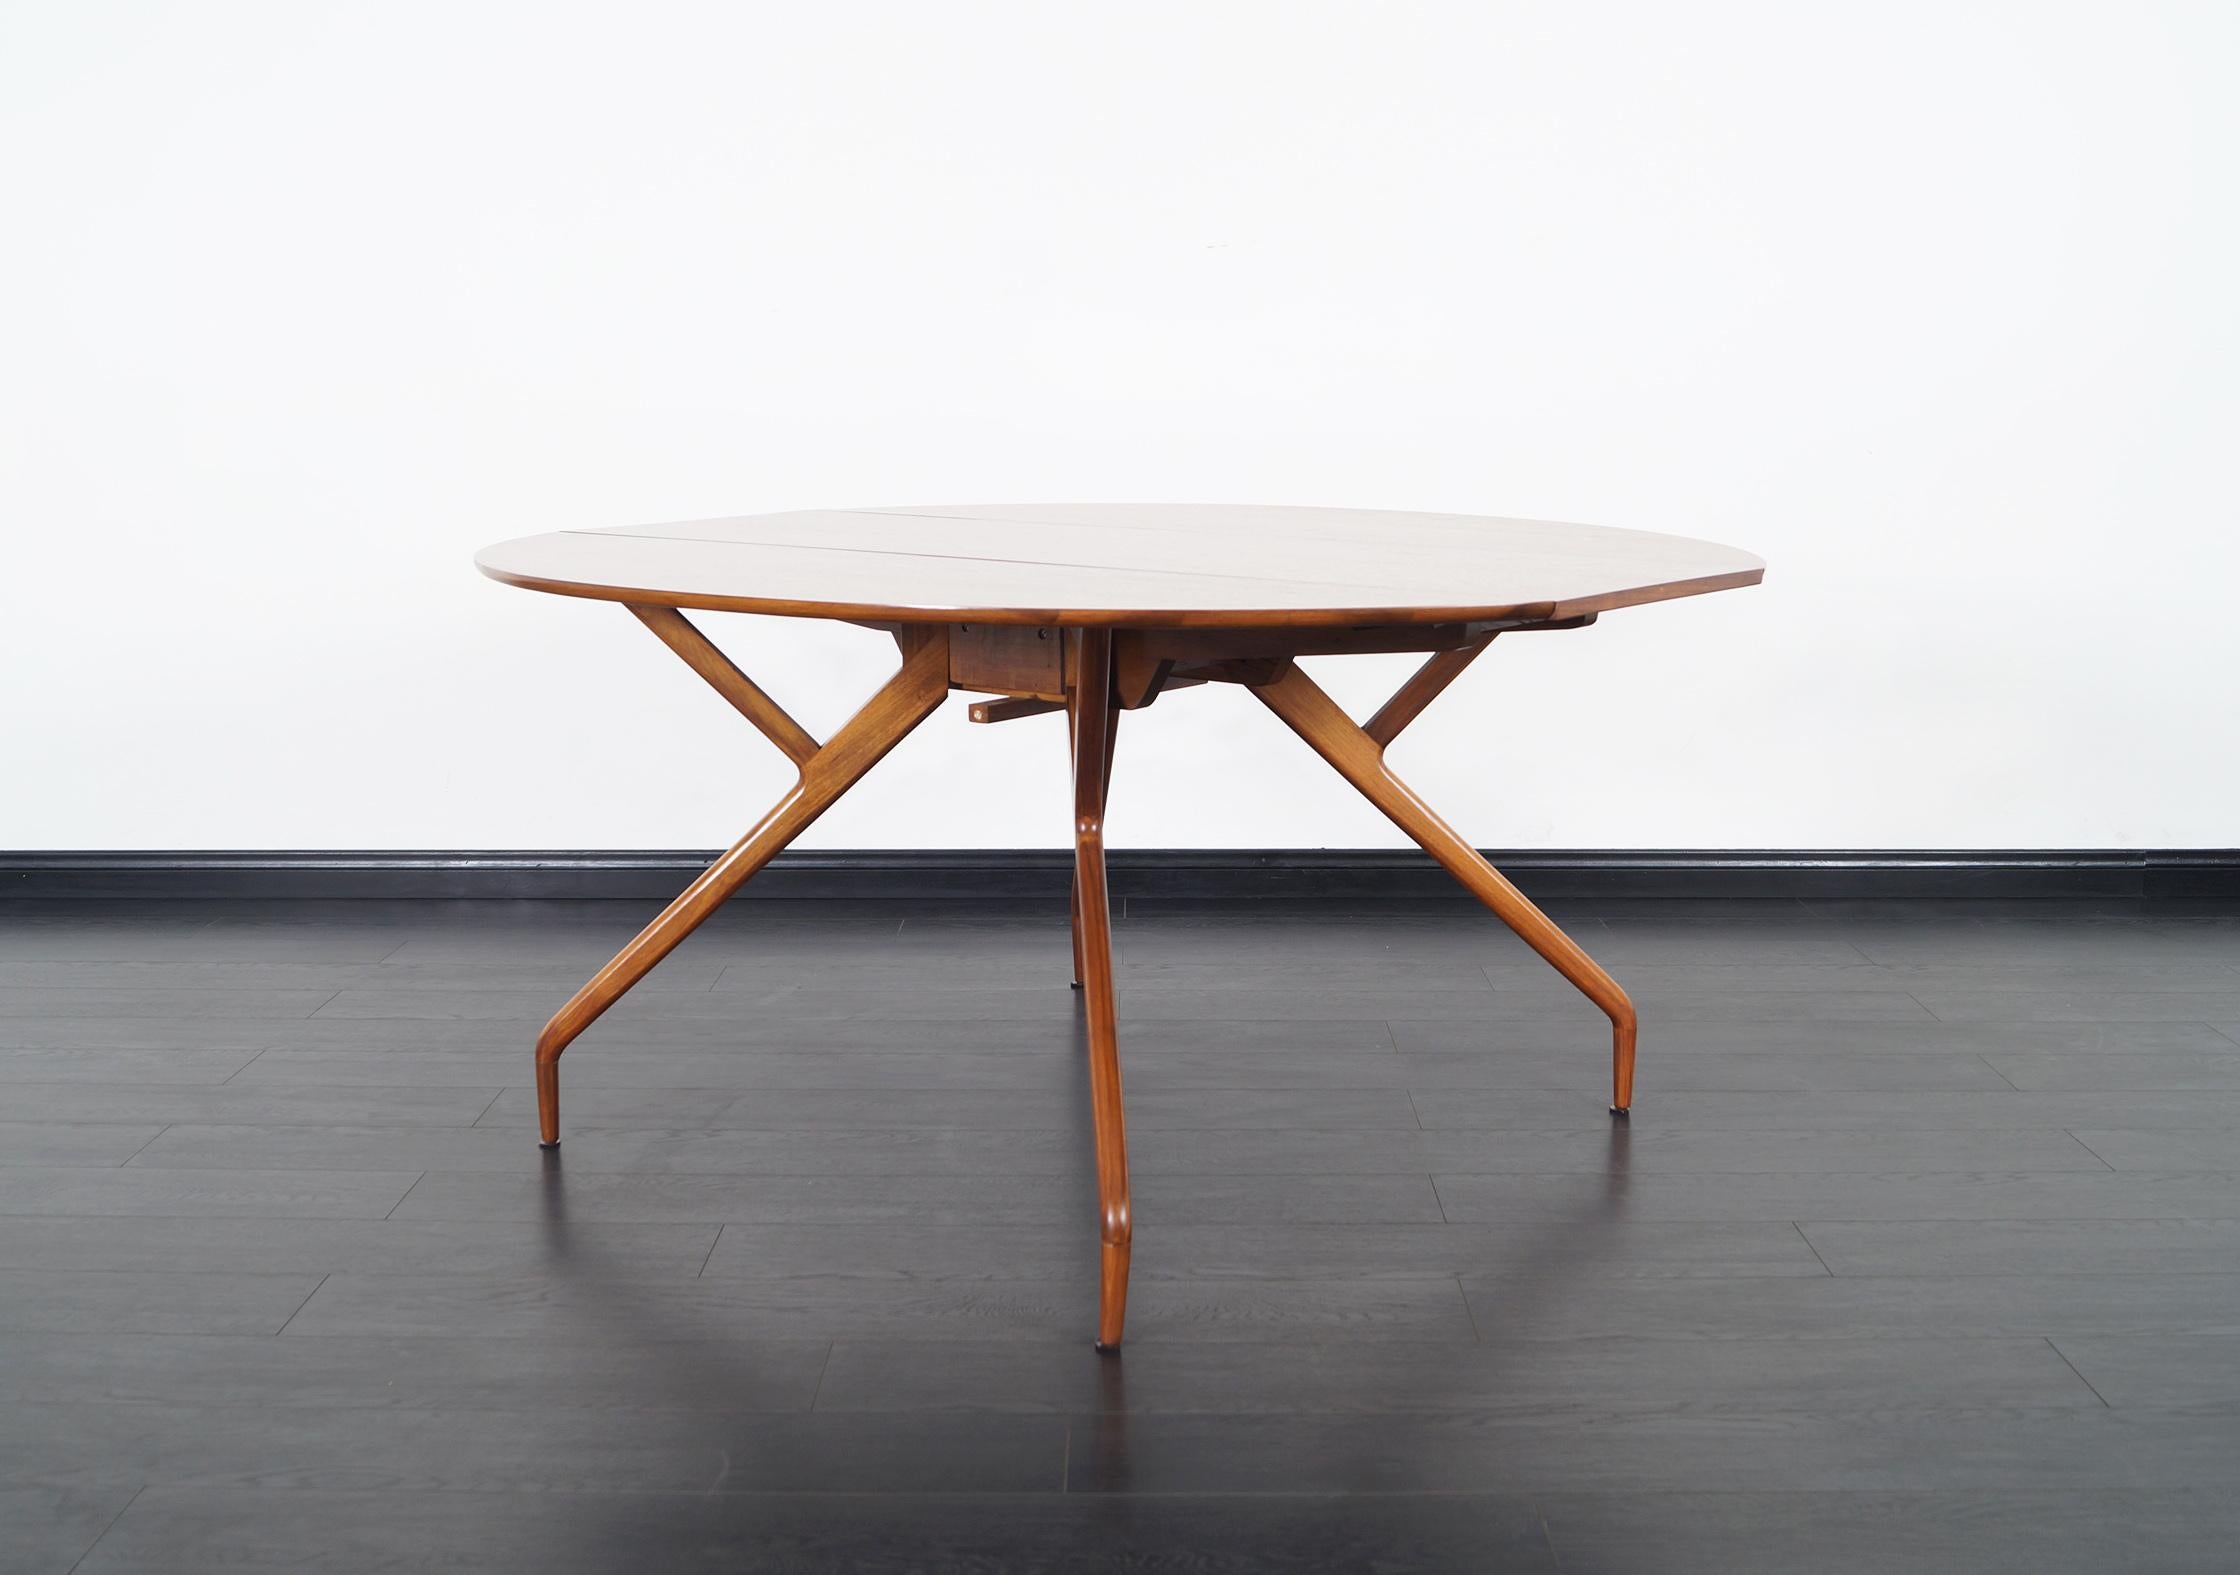 Wonderful vintage “Spider” dining table designed by Ed Frank for Glenn of California in United States, circa 1950s. The table is made from walnut that expresses elegance through the grains of the wood that make up the table. It has a very particular